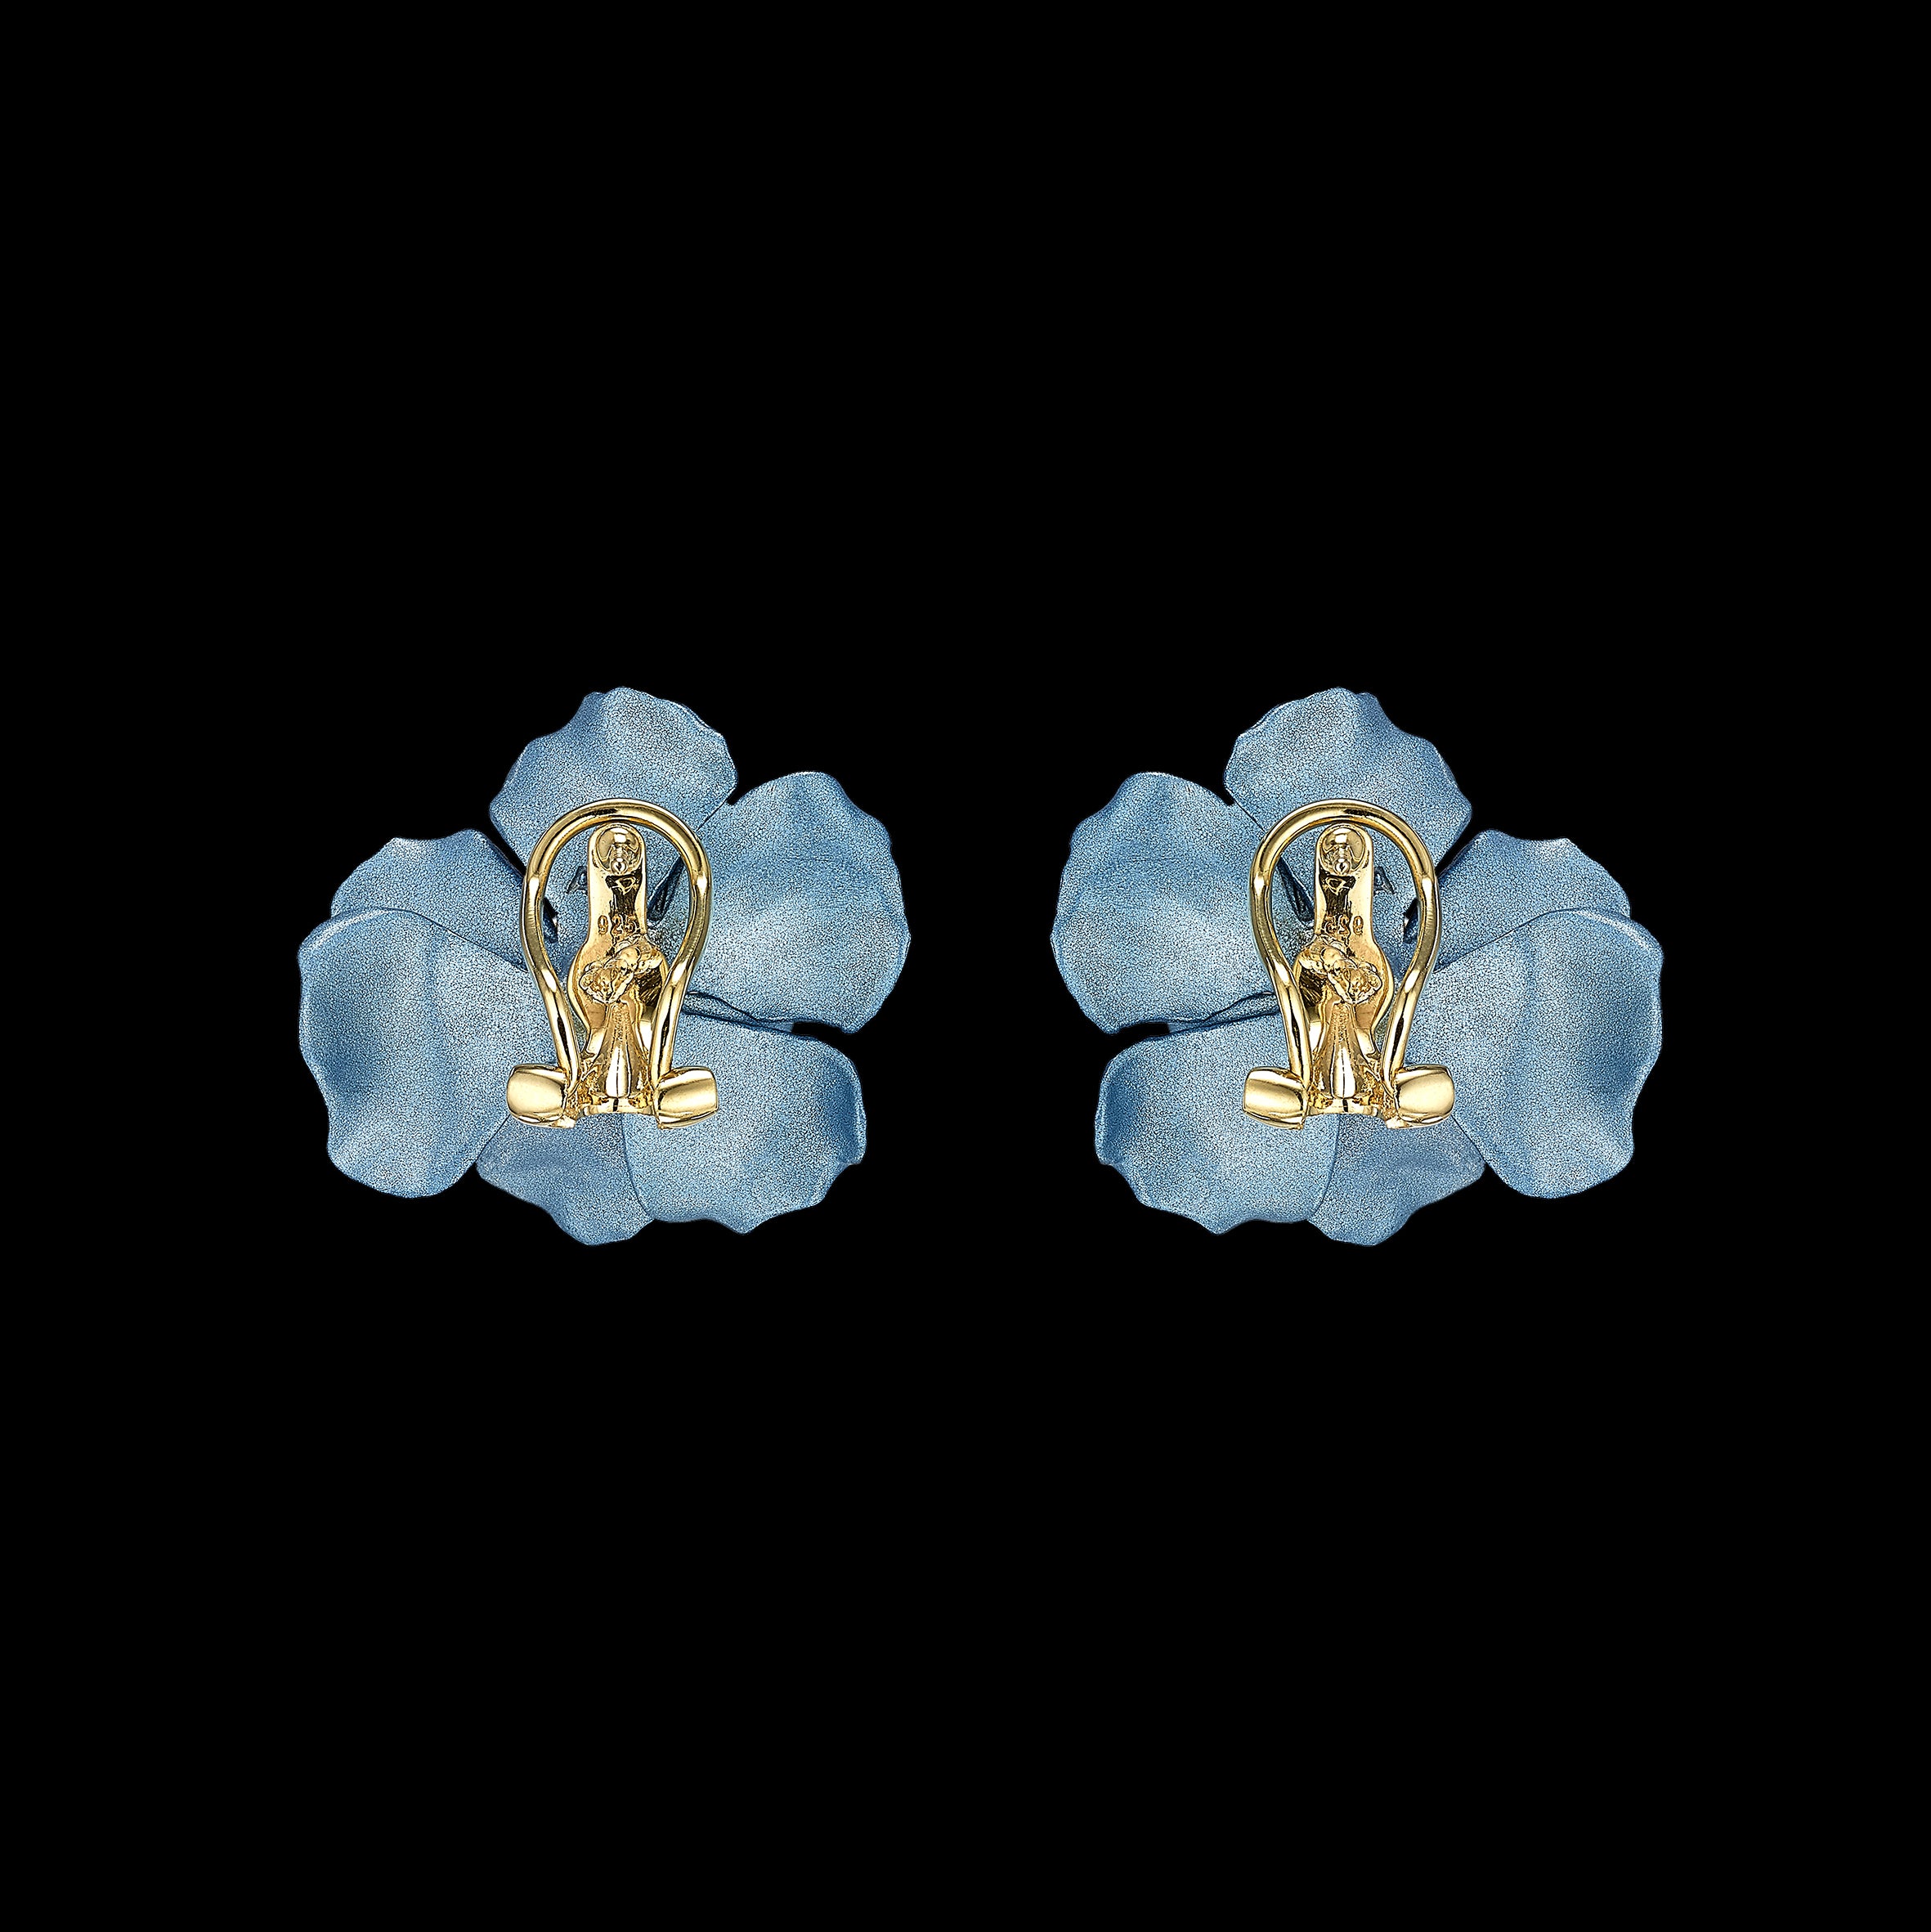 Baby Blue Rose Studs, Earrings, Anabela Chan Joaillerie - Fine jewelry with laboratory grown and created gemstones hand-crafted in the United Kingdom. Anabela Chan Joaillerie is the first fine jewellery brand in the world to champion laboratory-grown and created gemstones with high jewellery design, artisanal craftsmanship and a focus on ethical and sustainable innovations.